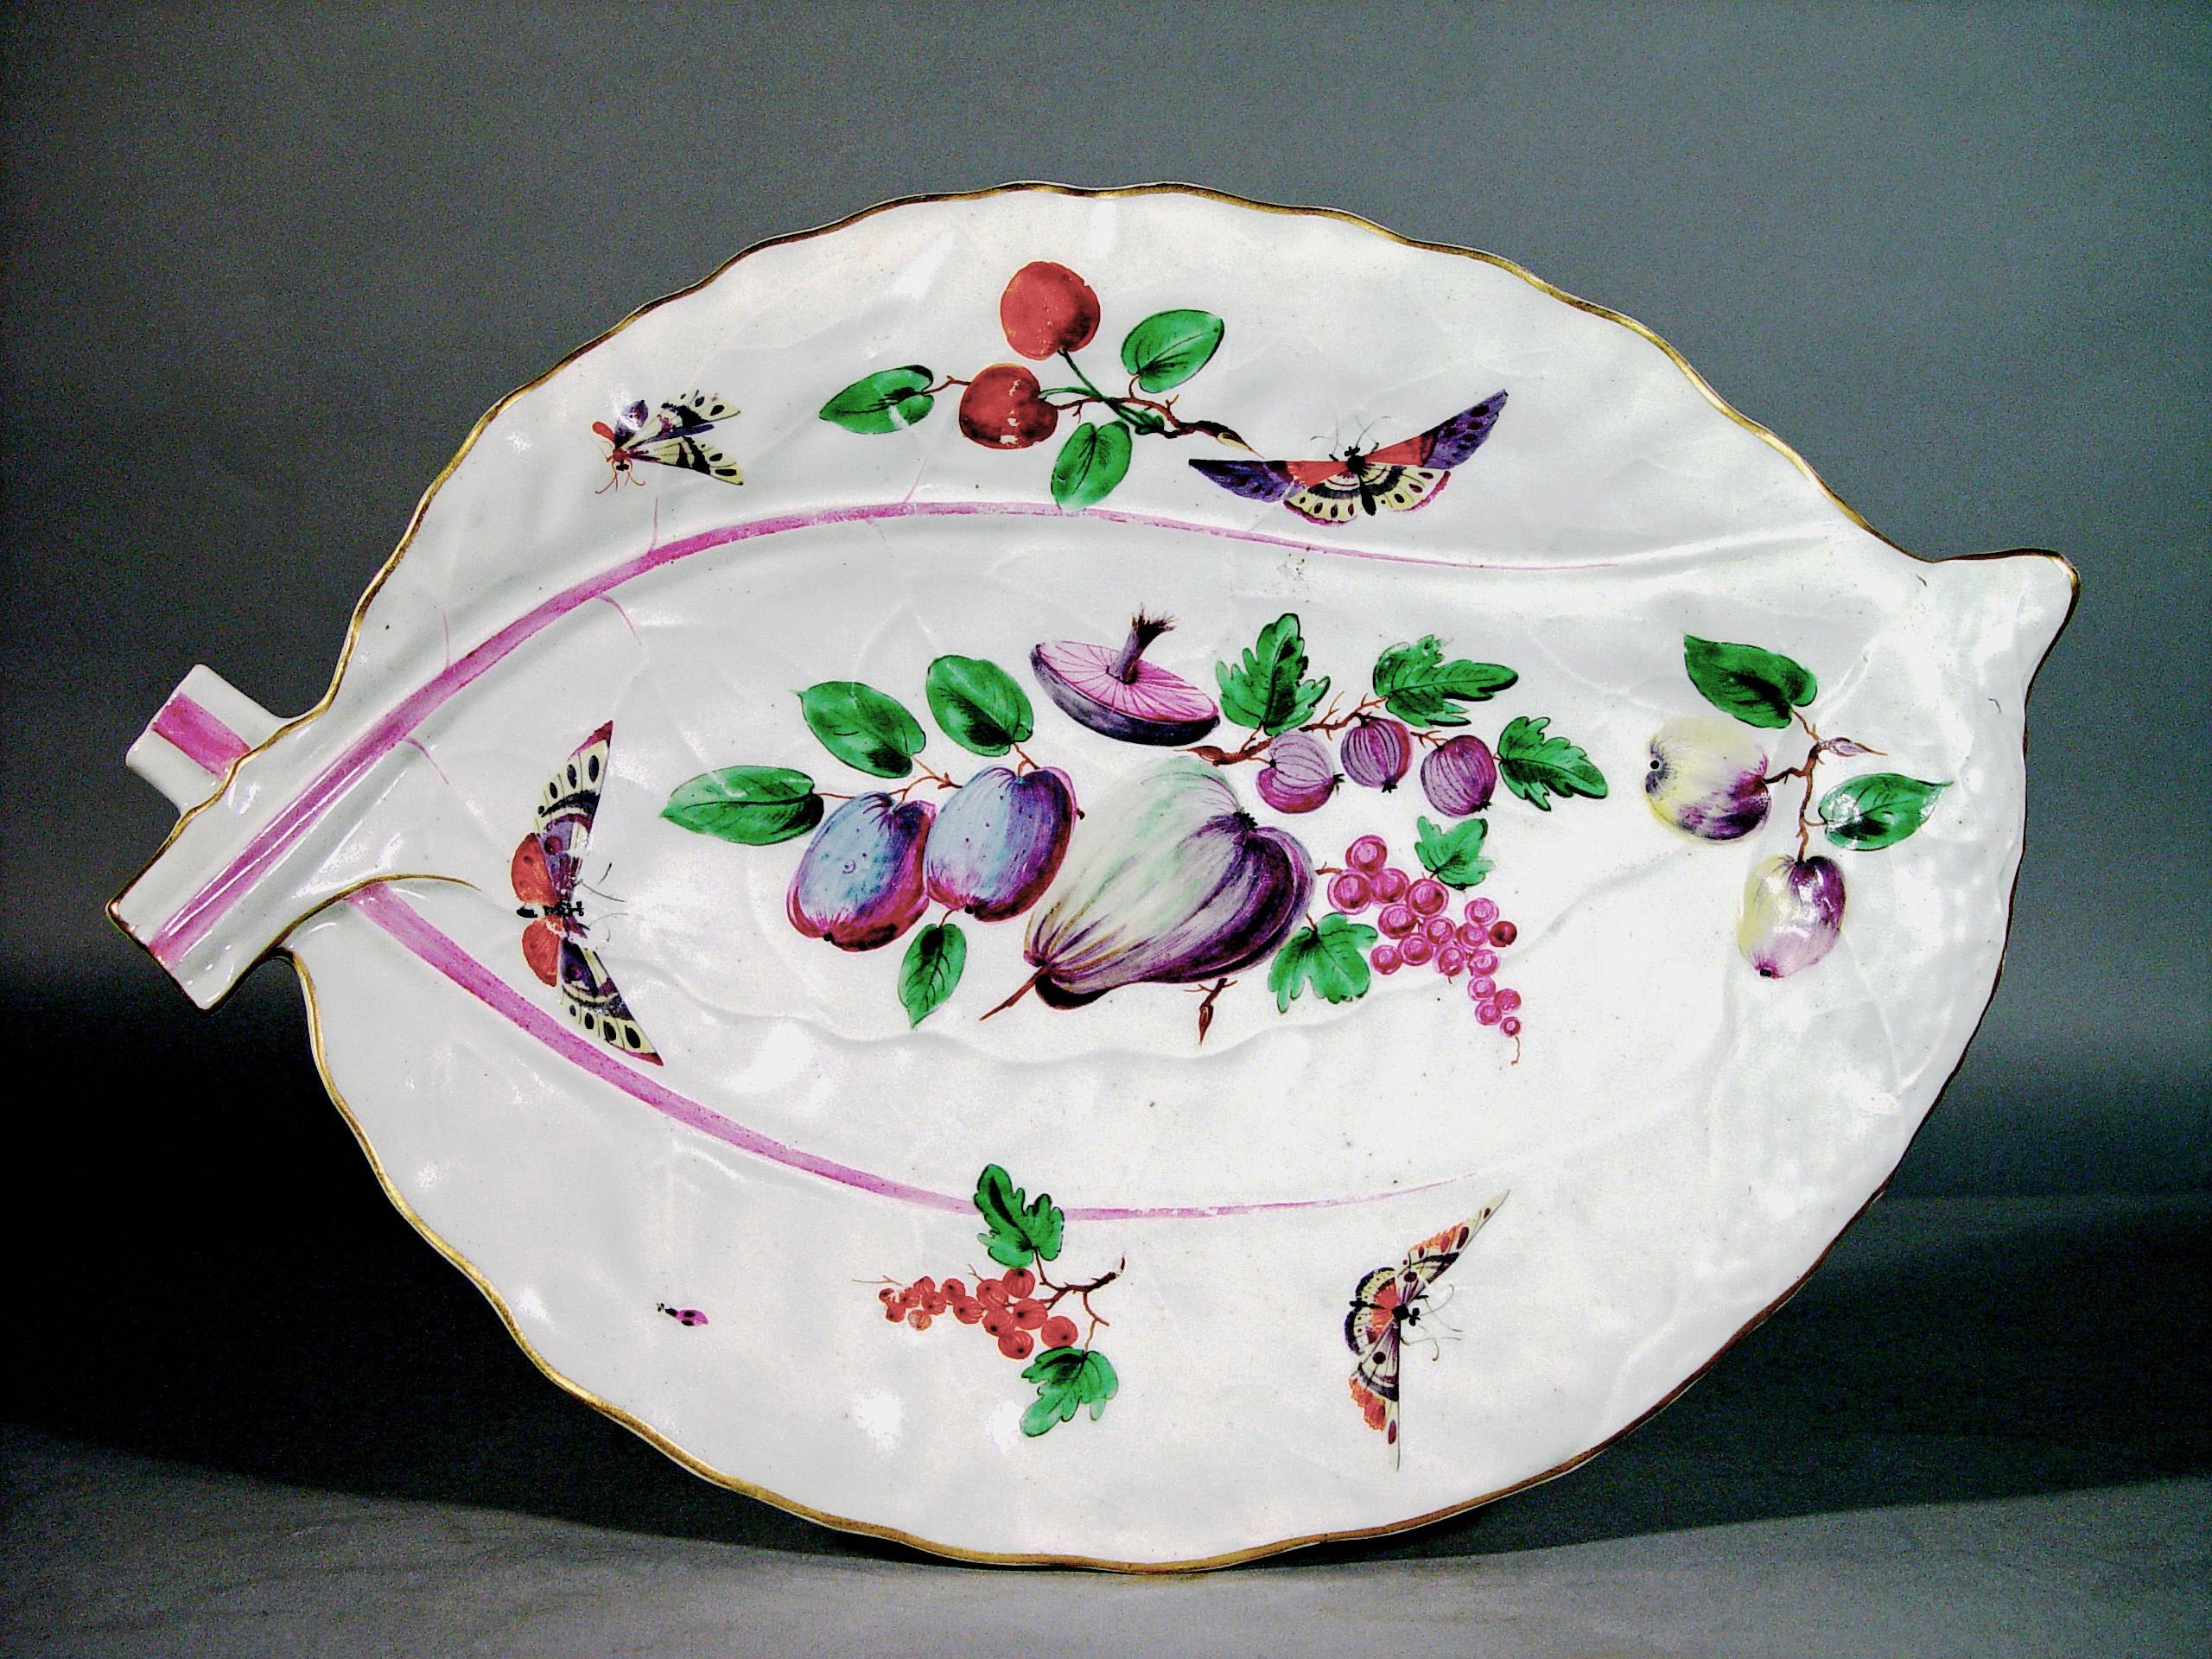 First Period worcester porcelain large leaf dish, 
London decorated probably painted by James Giles
Circa 1770.

This molded First Period Worcester porcelain overlapping leaf dish was possibly decorated by the famous London painter, James Giles.